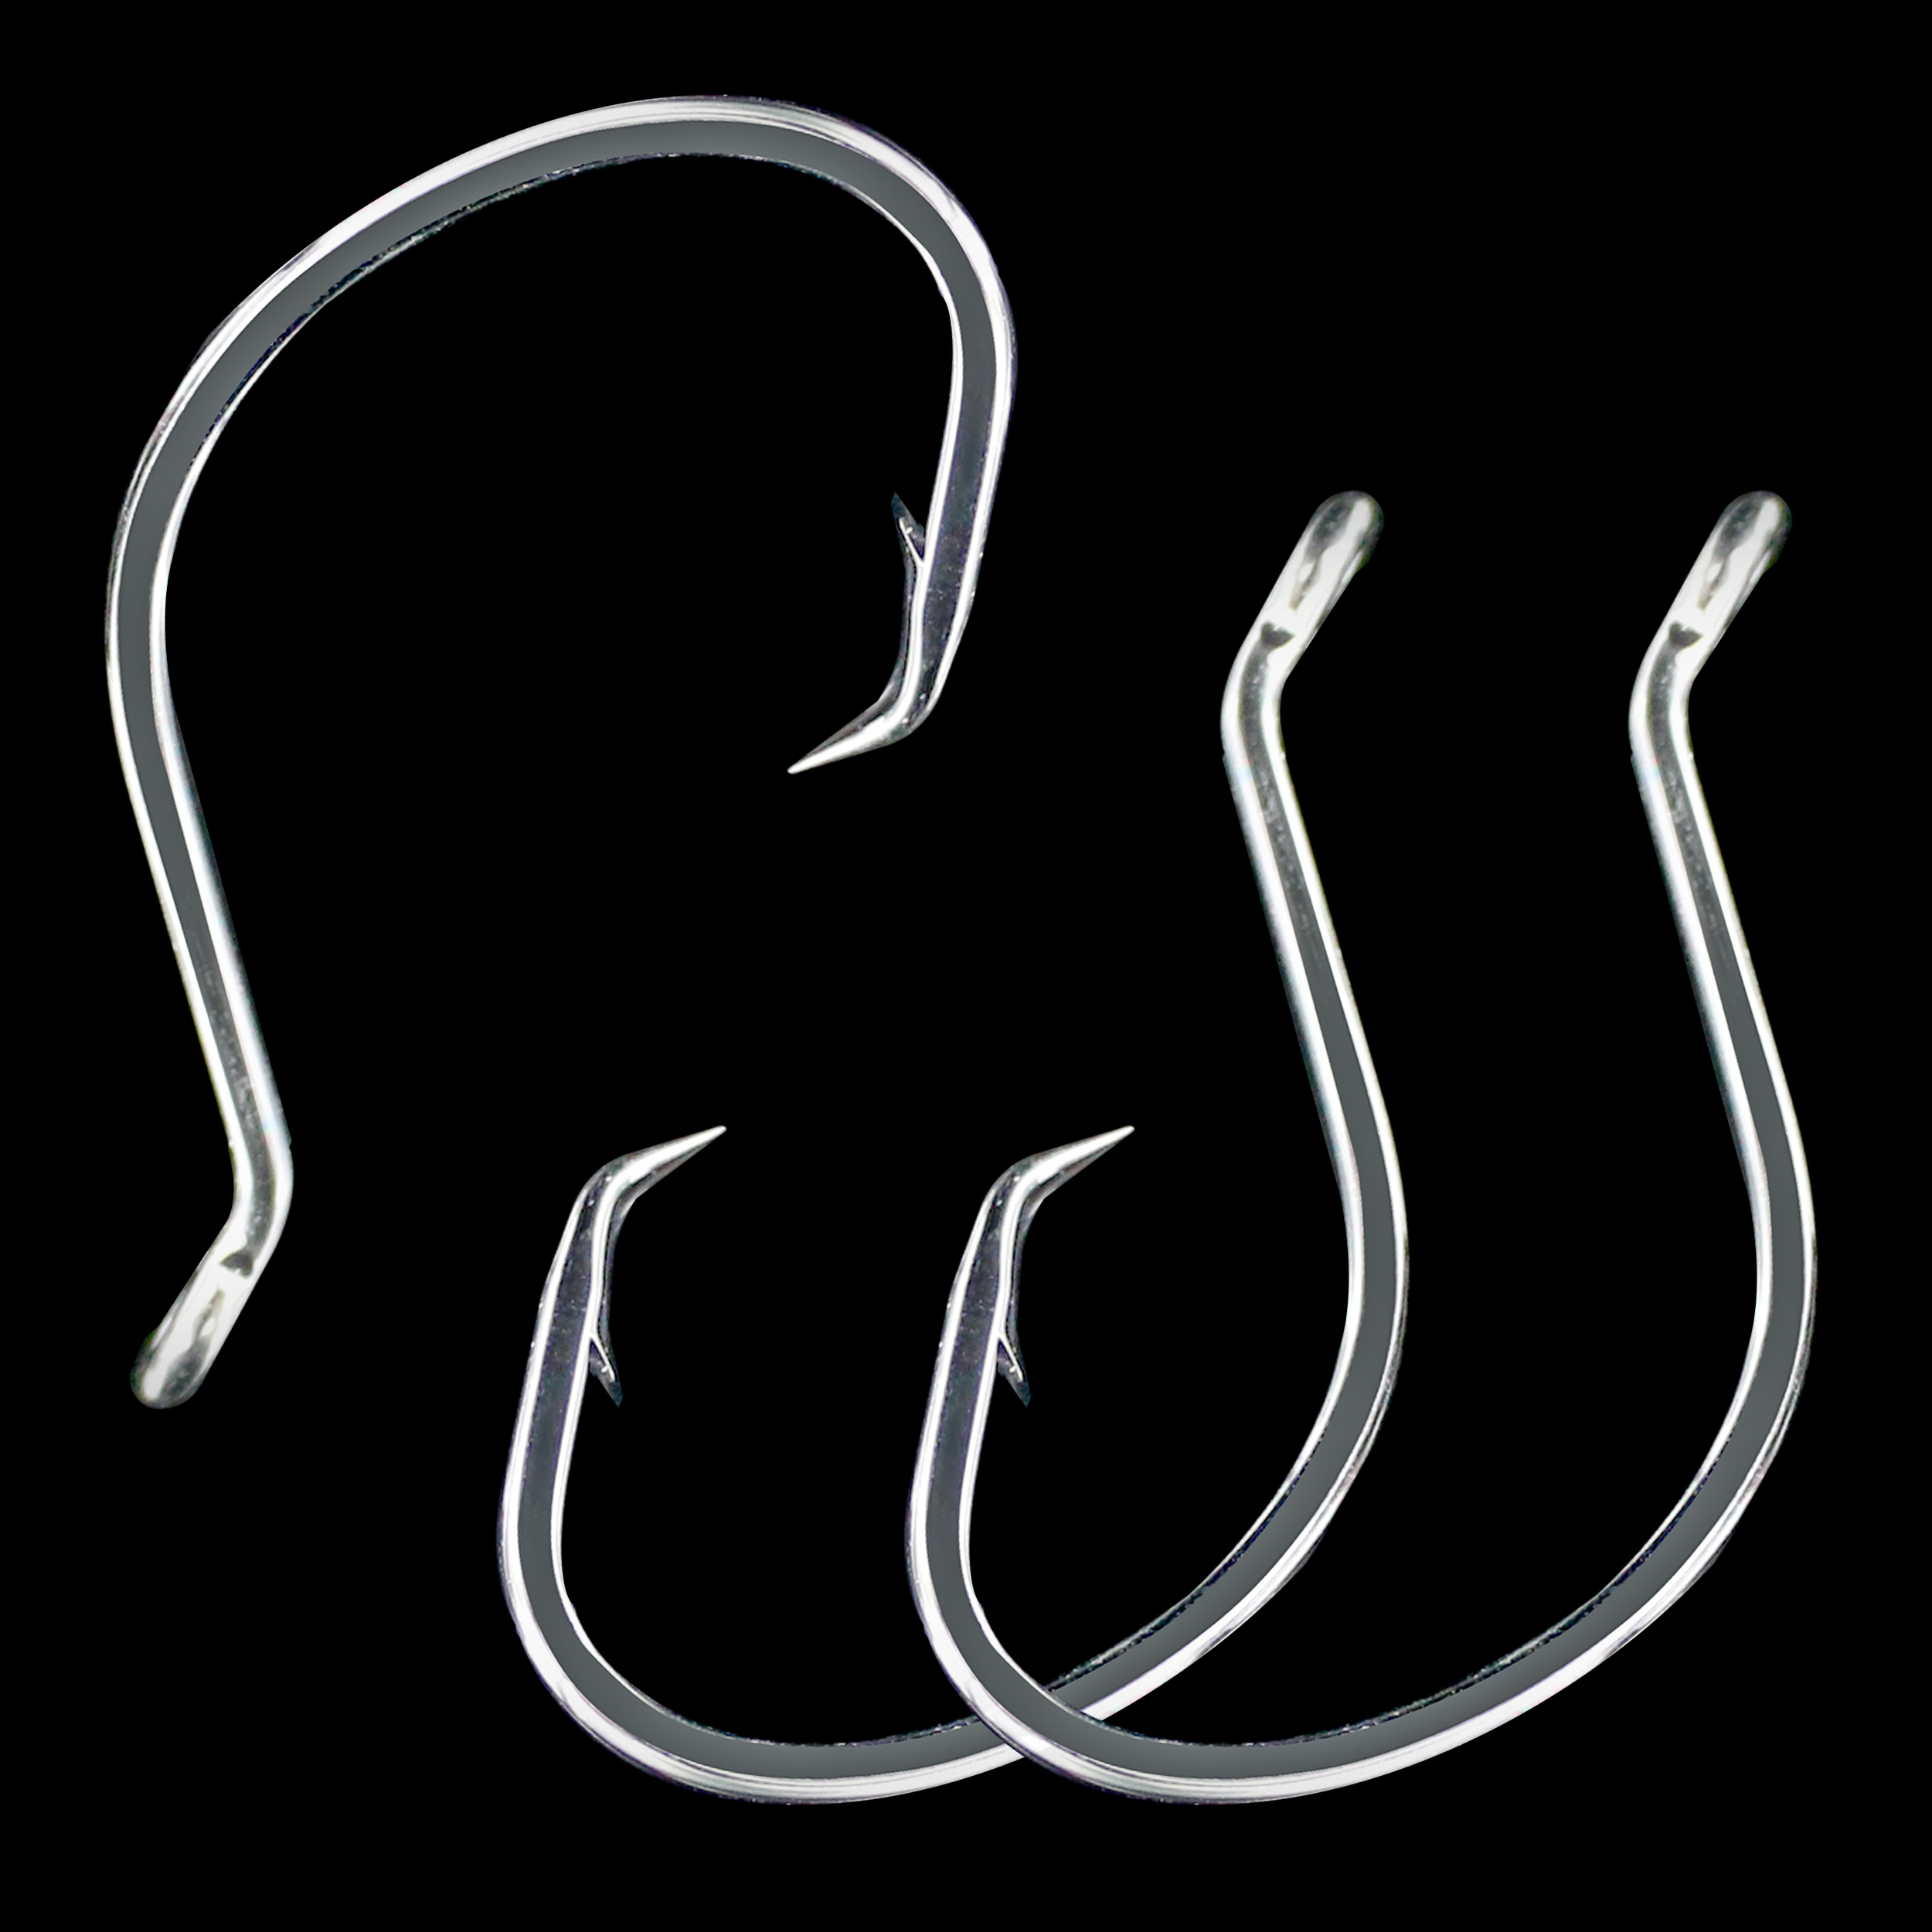 snell knot circle hook